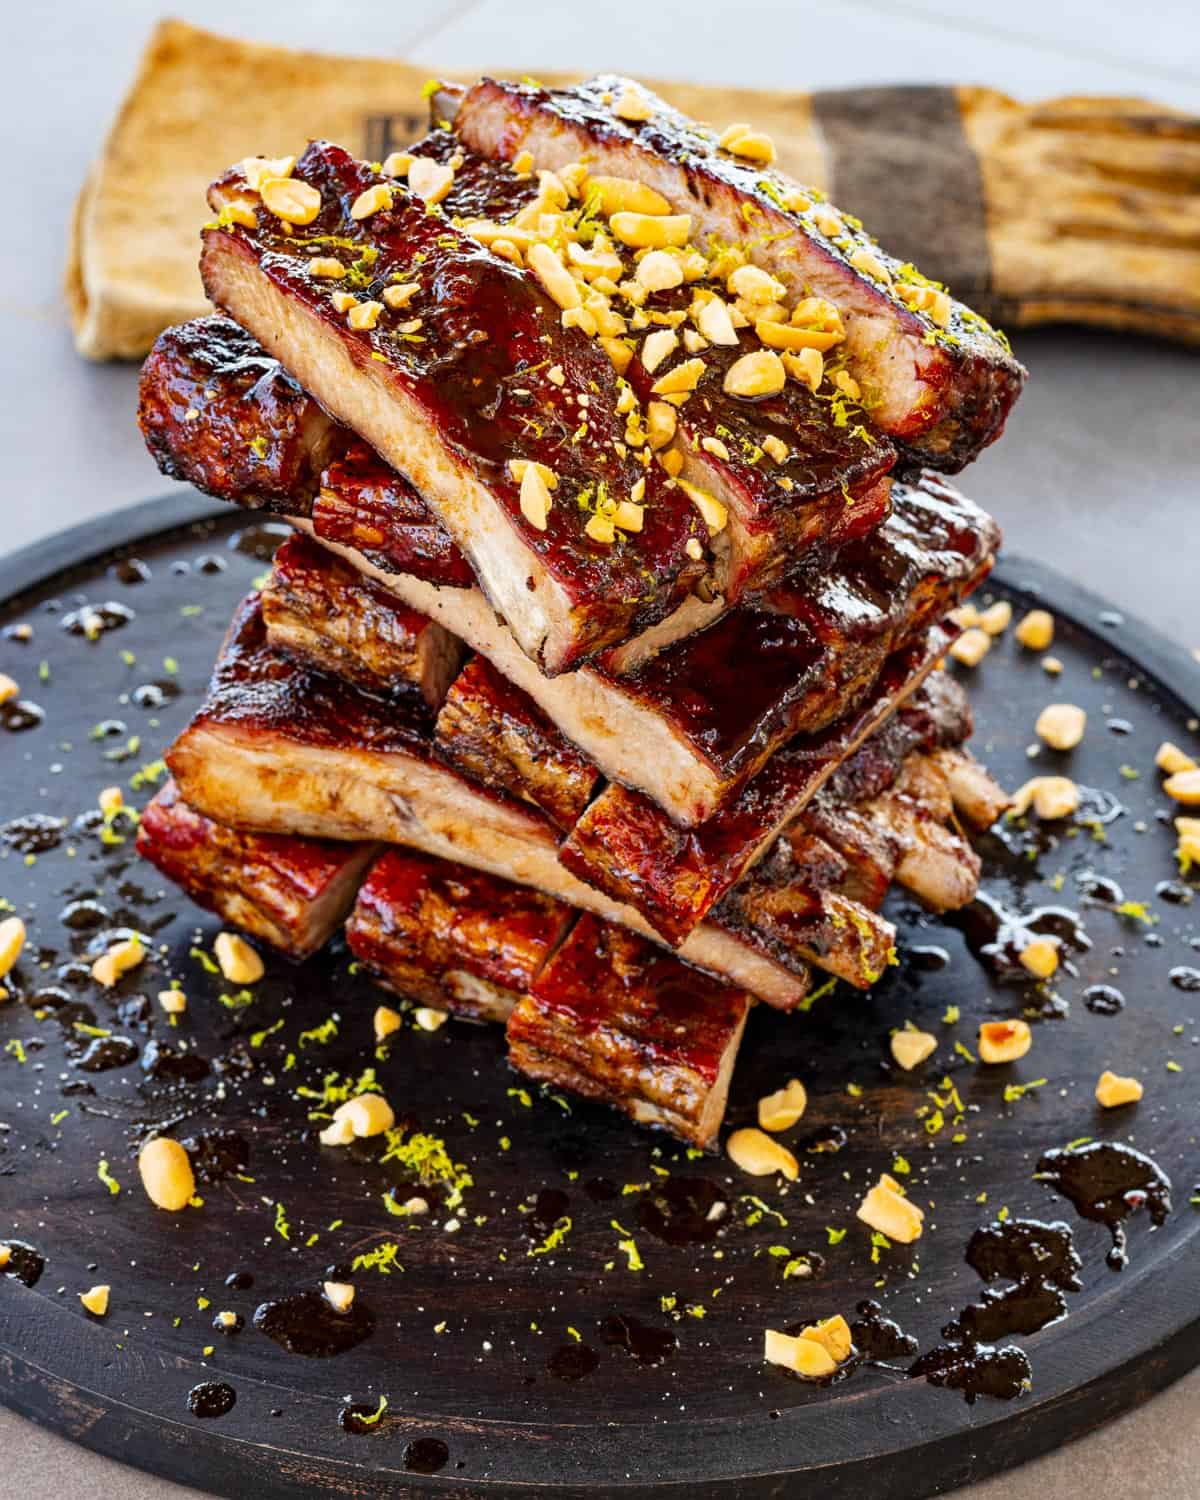 The Cherry Cola Spare Ribs ready to eat!